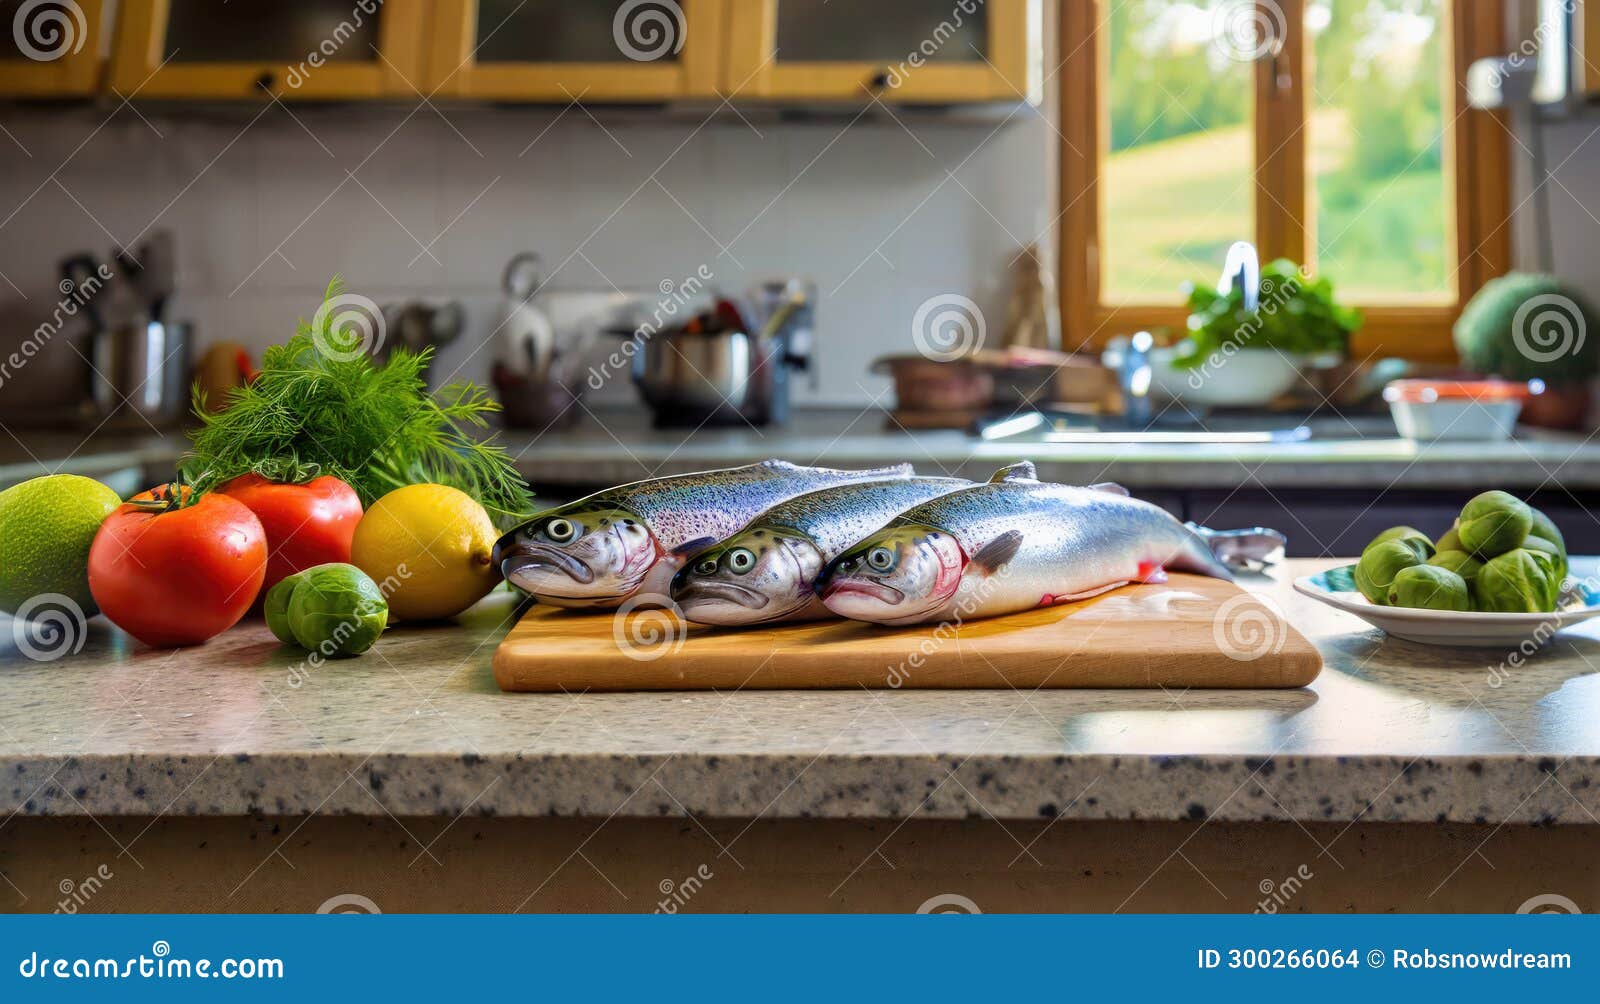 a selection of fresh fish: trout, sitting on a chopping board against blurred kitchen background copy space